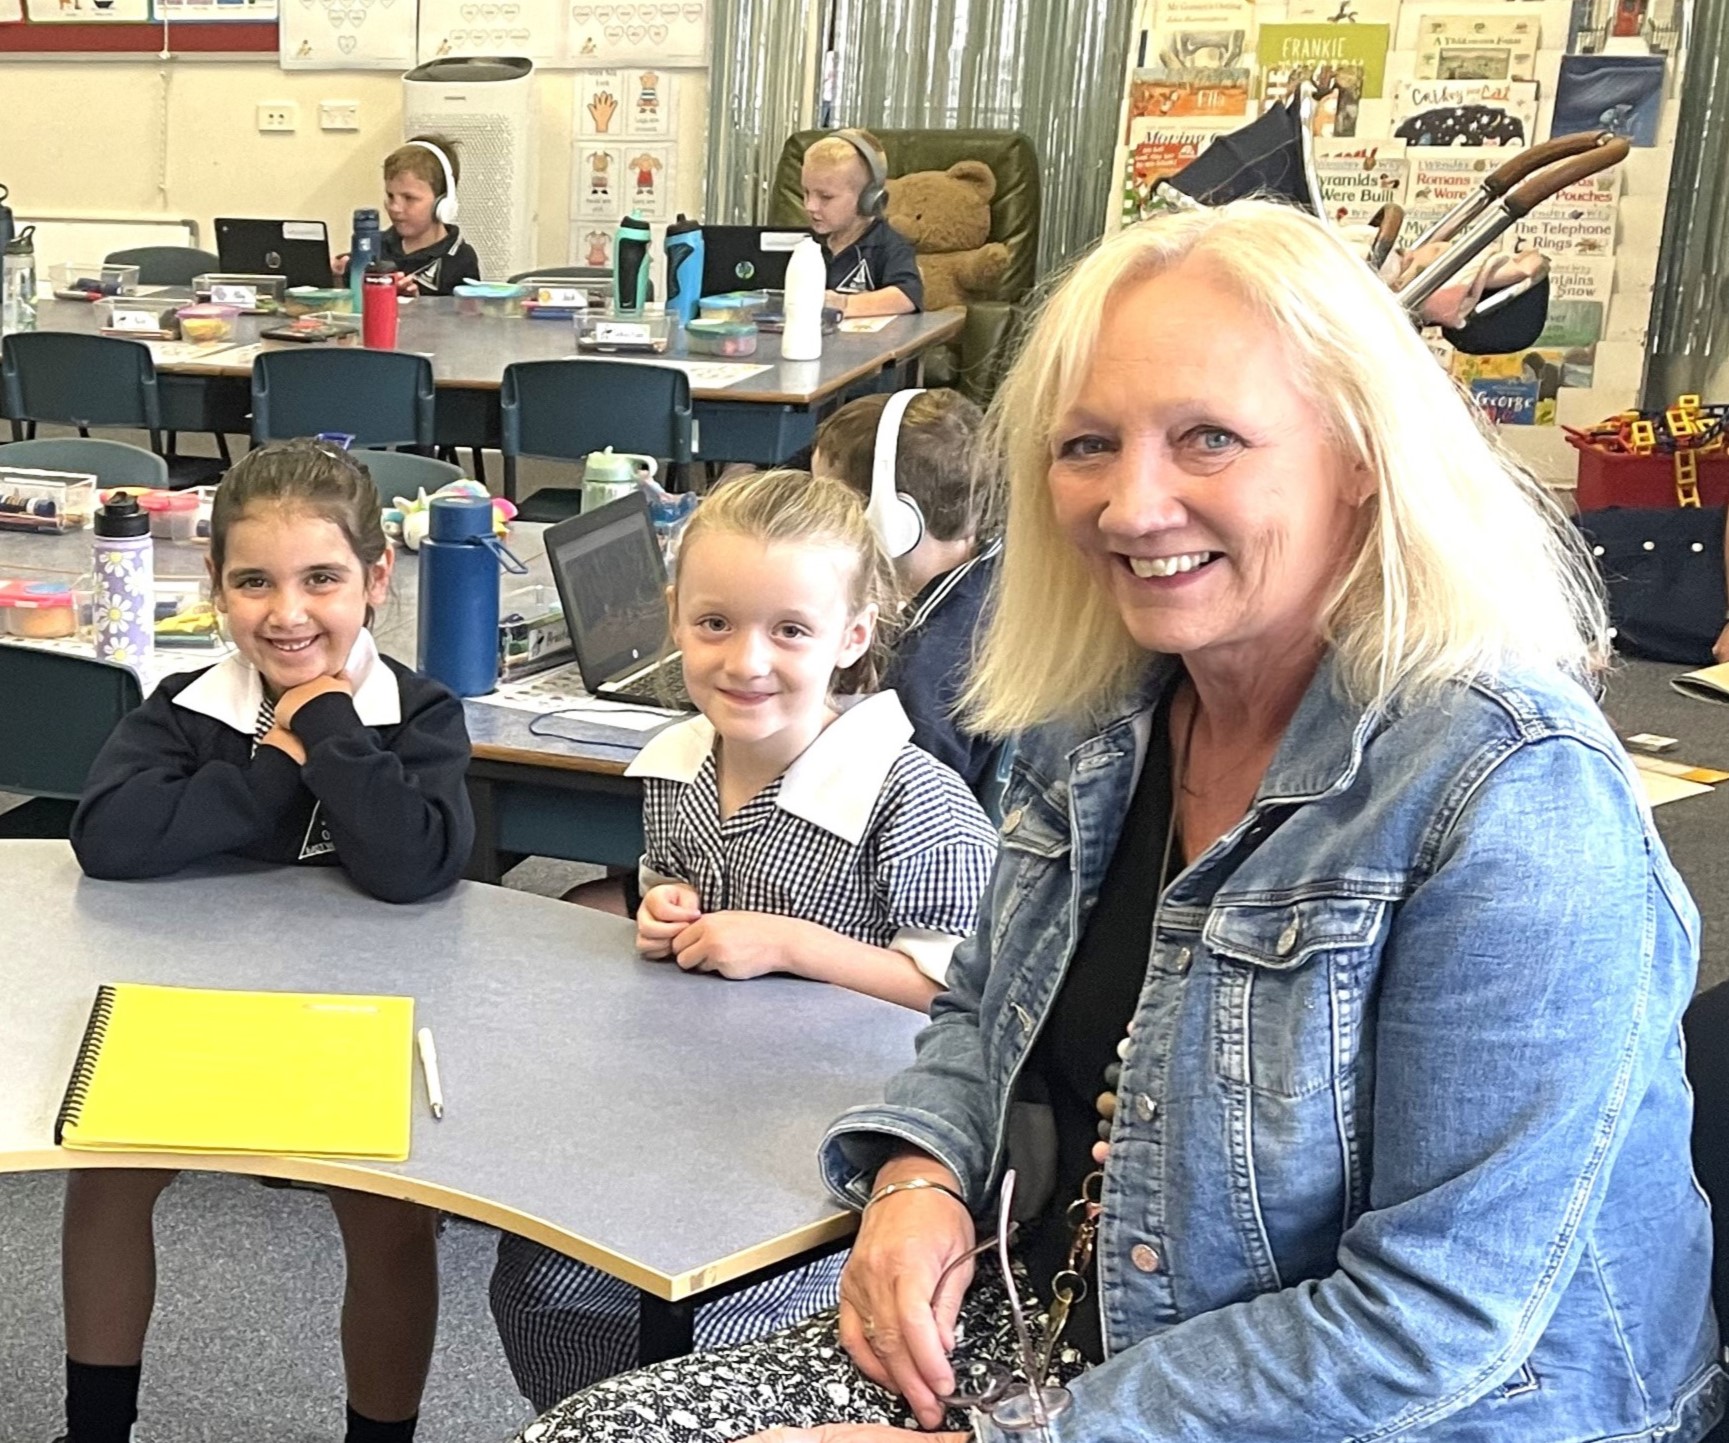 Foundation teacher Sharon Dwyer, from Our Lady Help of Christians School (OLHC), Warrnambool, was nominated for an award by her school community for 'Empowering all to Flourish'.